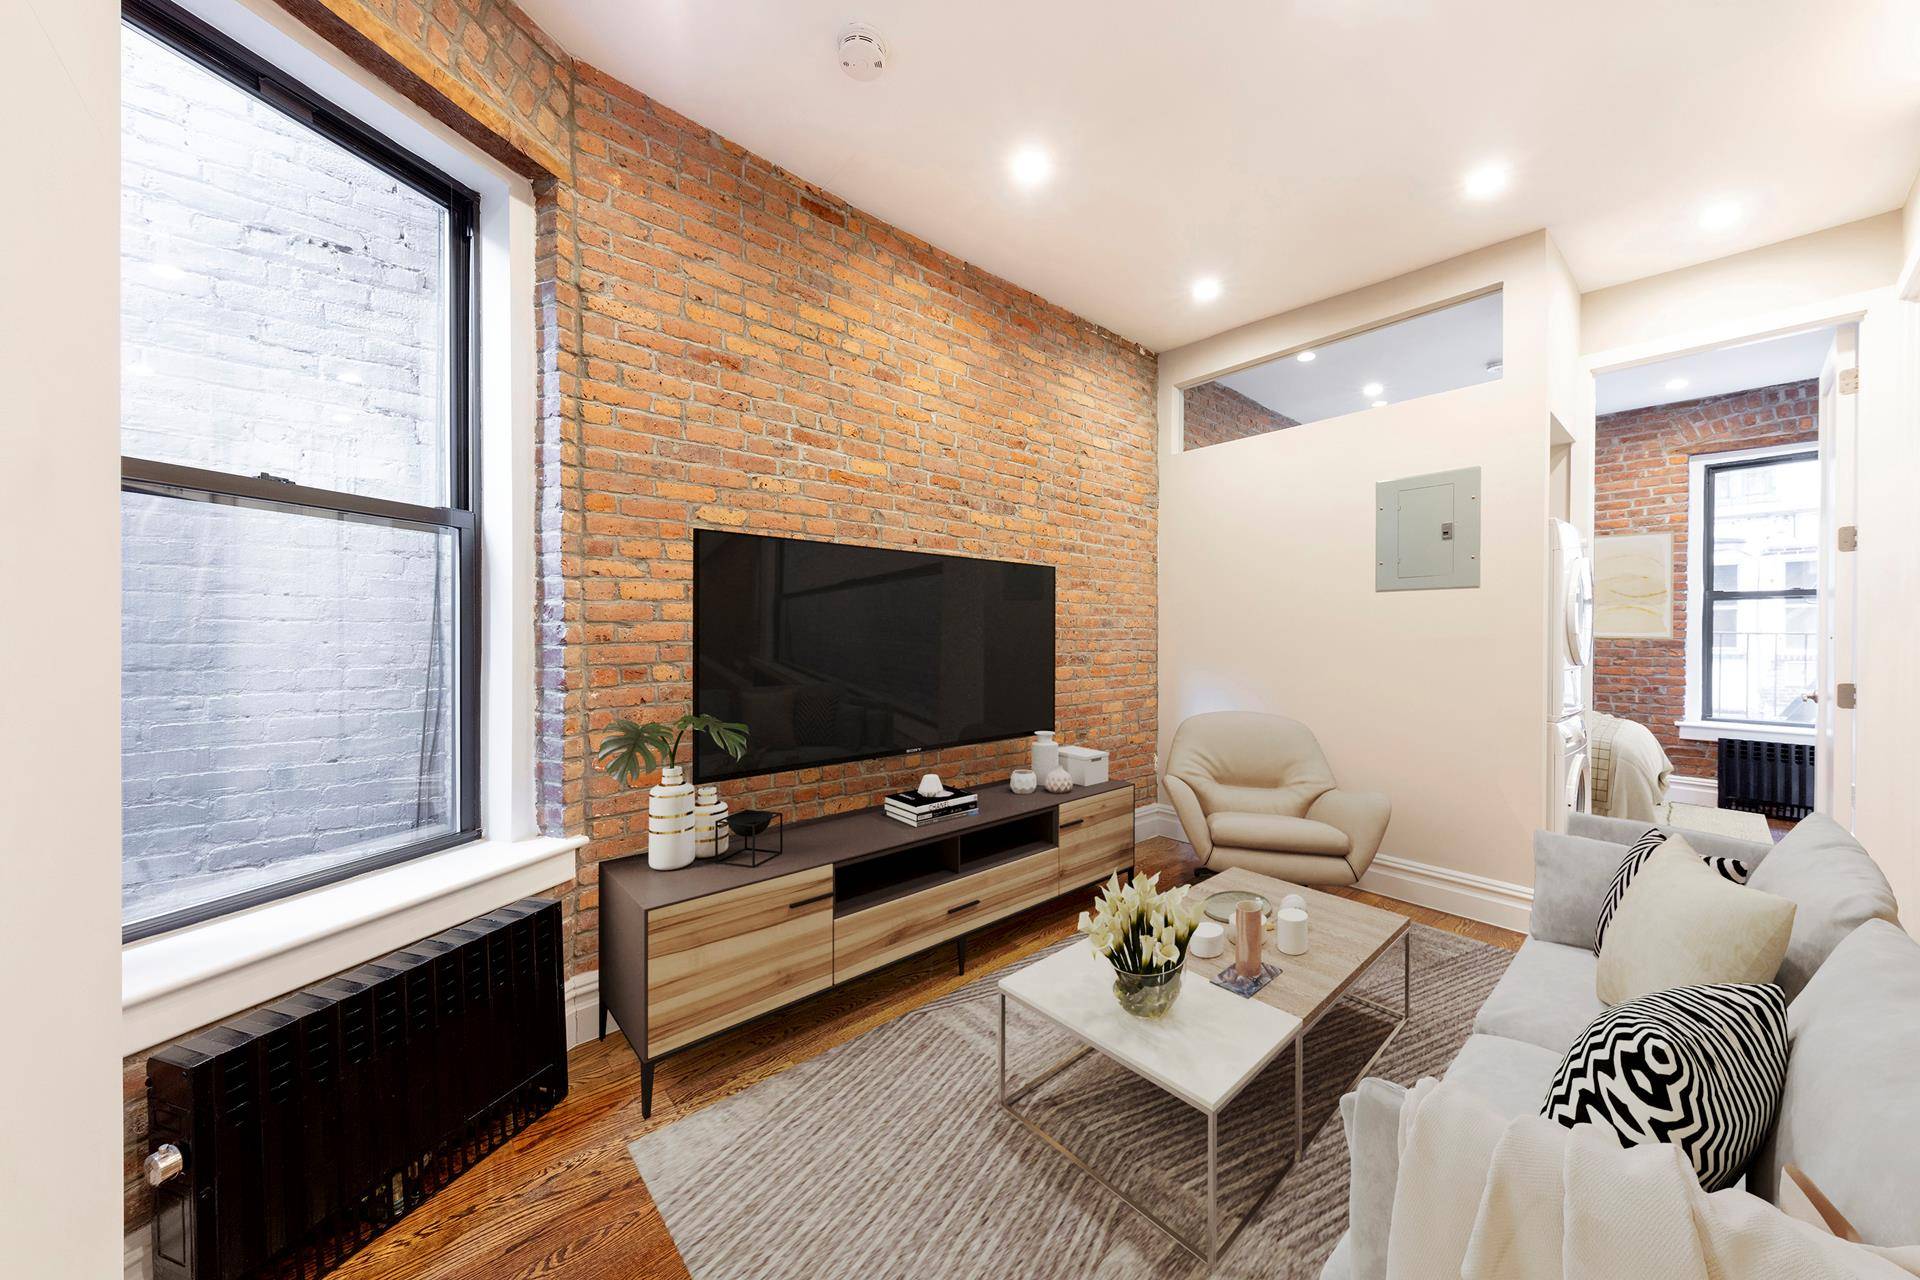 AVAILABLE JUNE 1OPEN HOUSE IS BY APPOINTMENTWASHER DRYER IN UNITPRIME WEST VILLAGE BEAUTIFUL GUT RENOVATED 2 BEDROOM HOME !